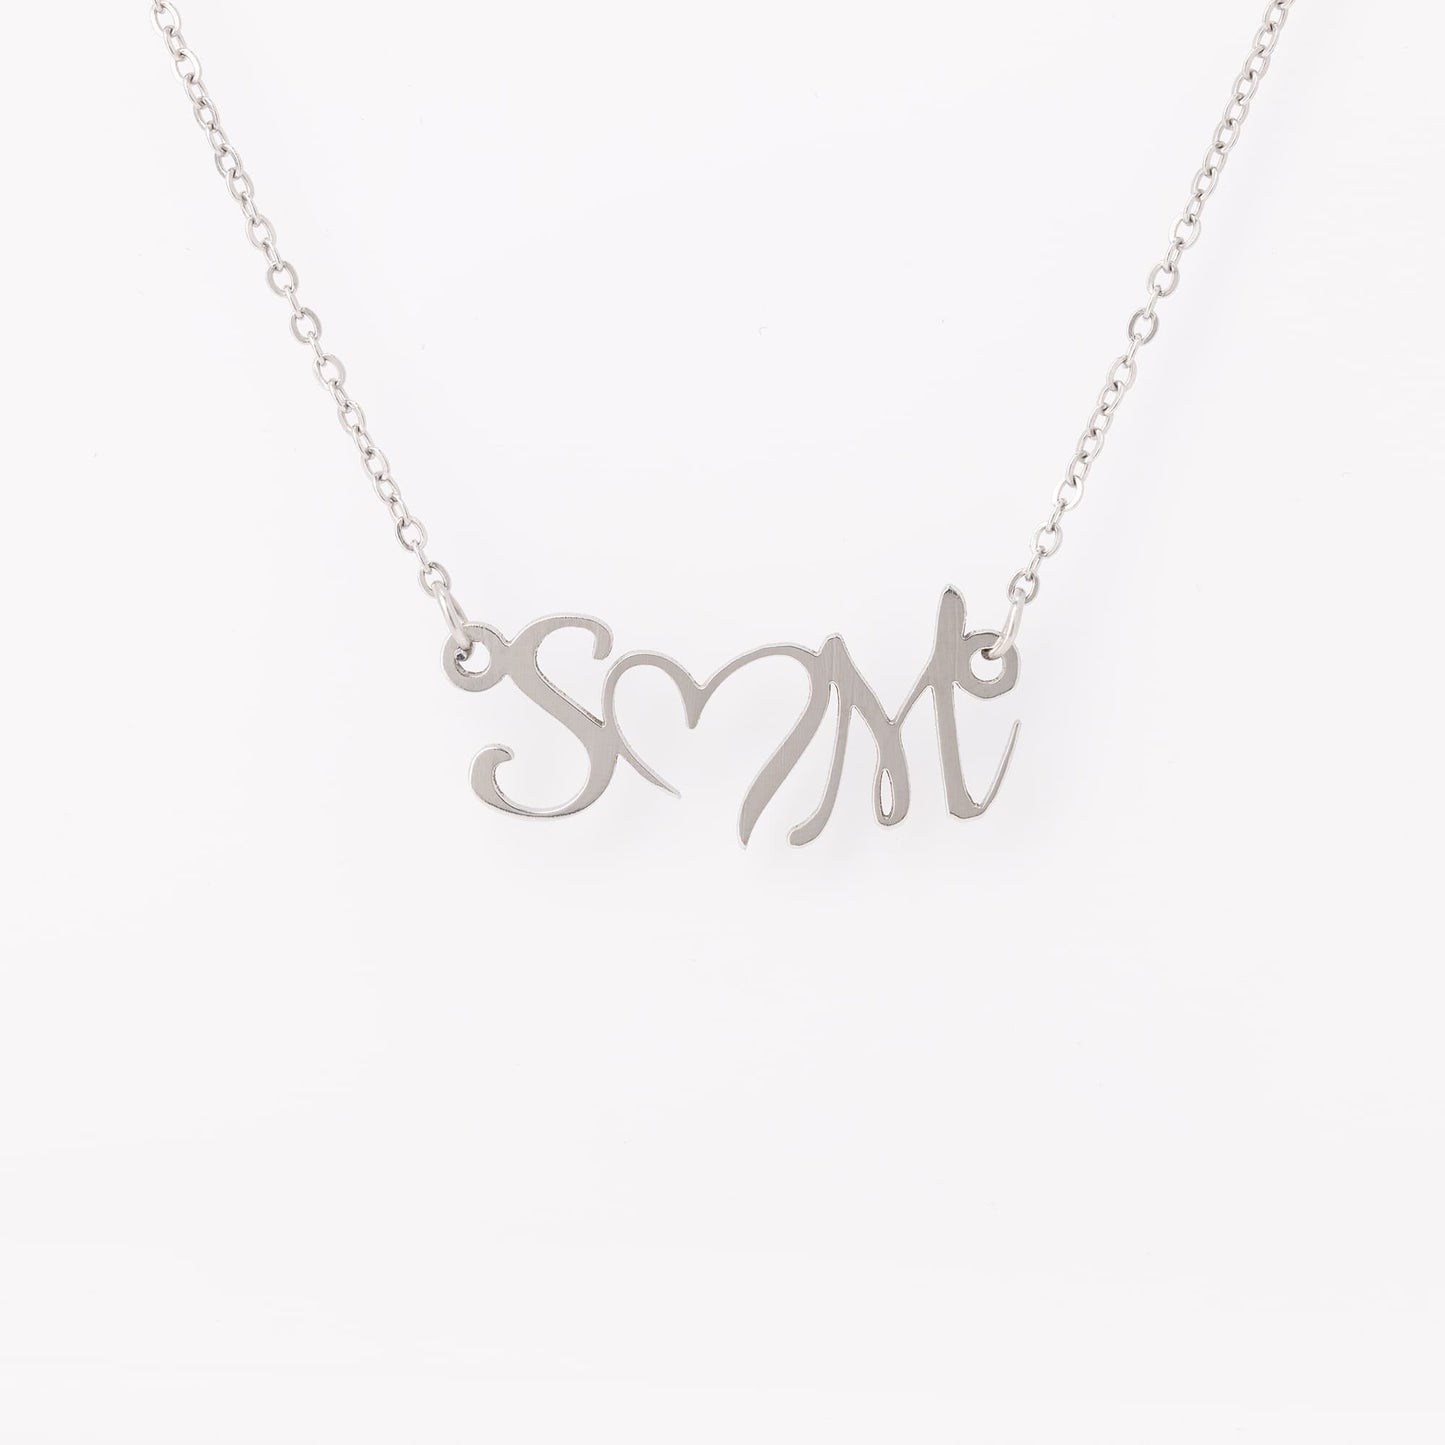 Double Initial Necklace 17 inch Adjustable Chain